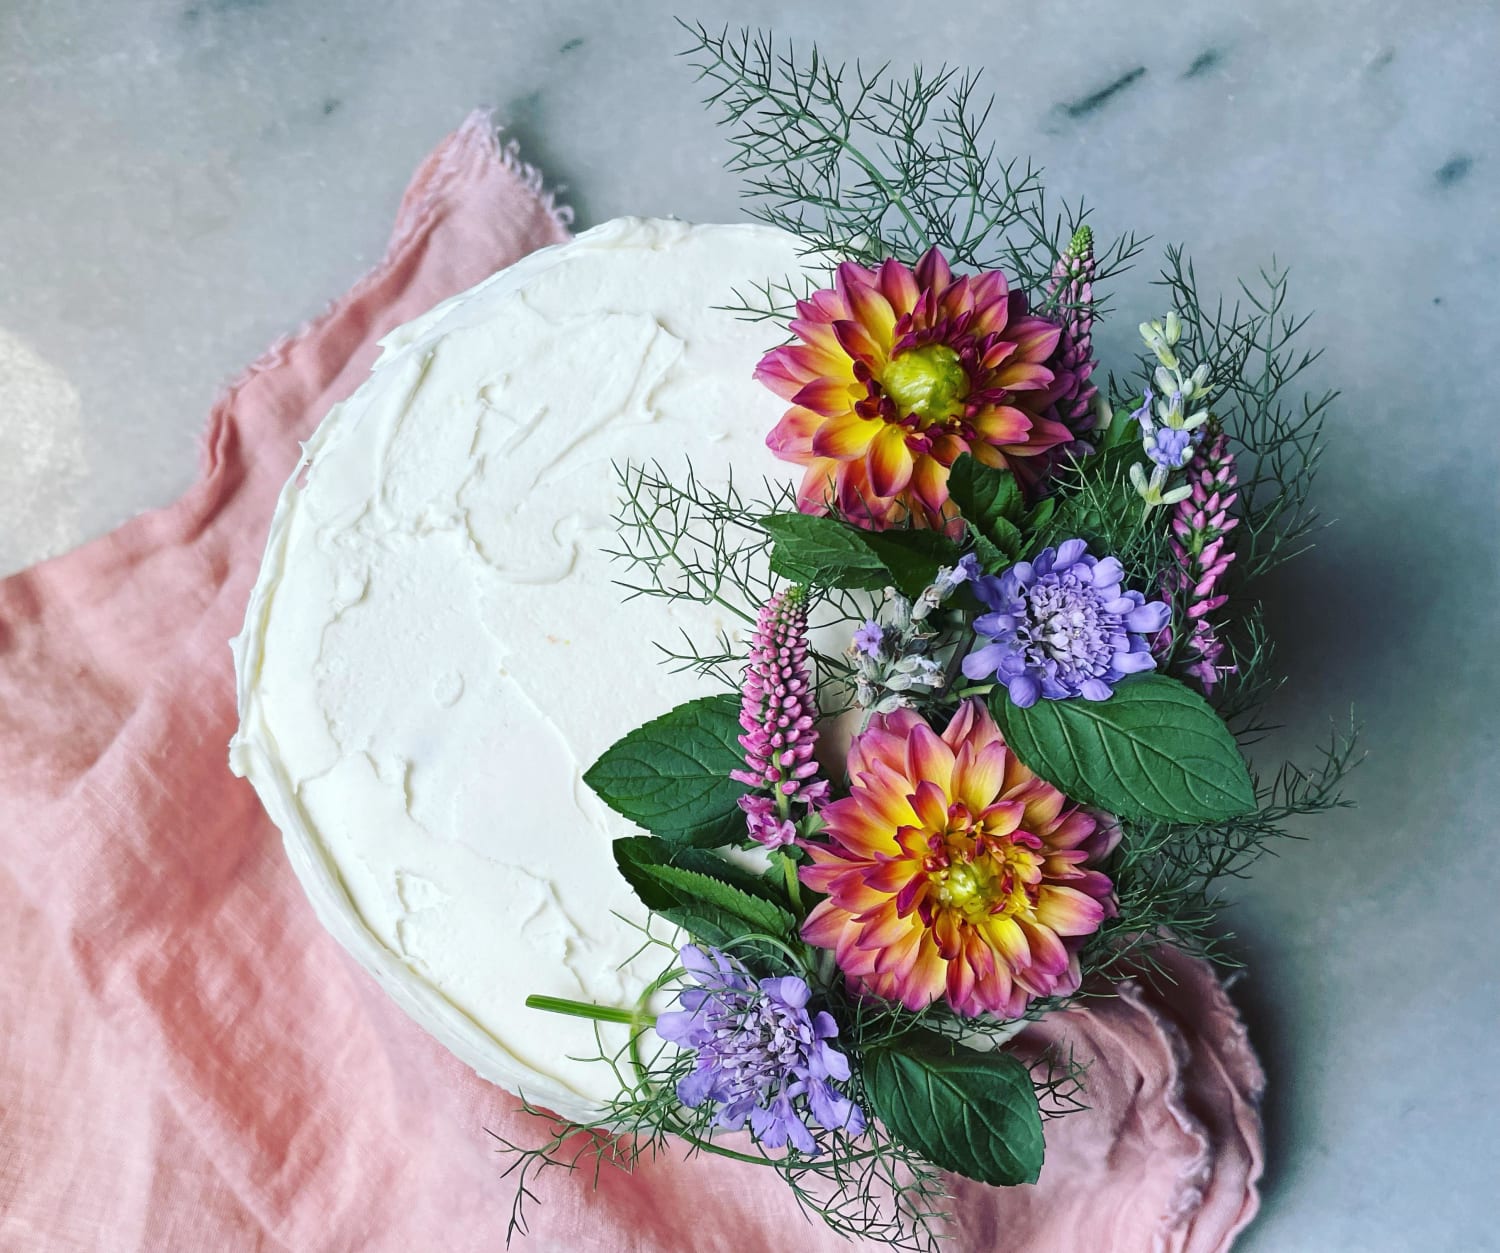 Sprinkles cake w/lemon curd & marshmallow icing, all homemade. Dahlias, fennel, chocolate mint, scabiosa, lavender, & veronica from my garden